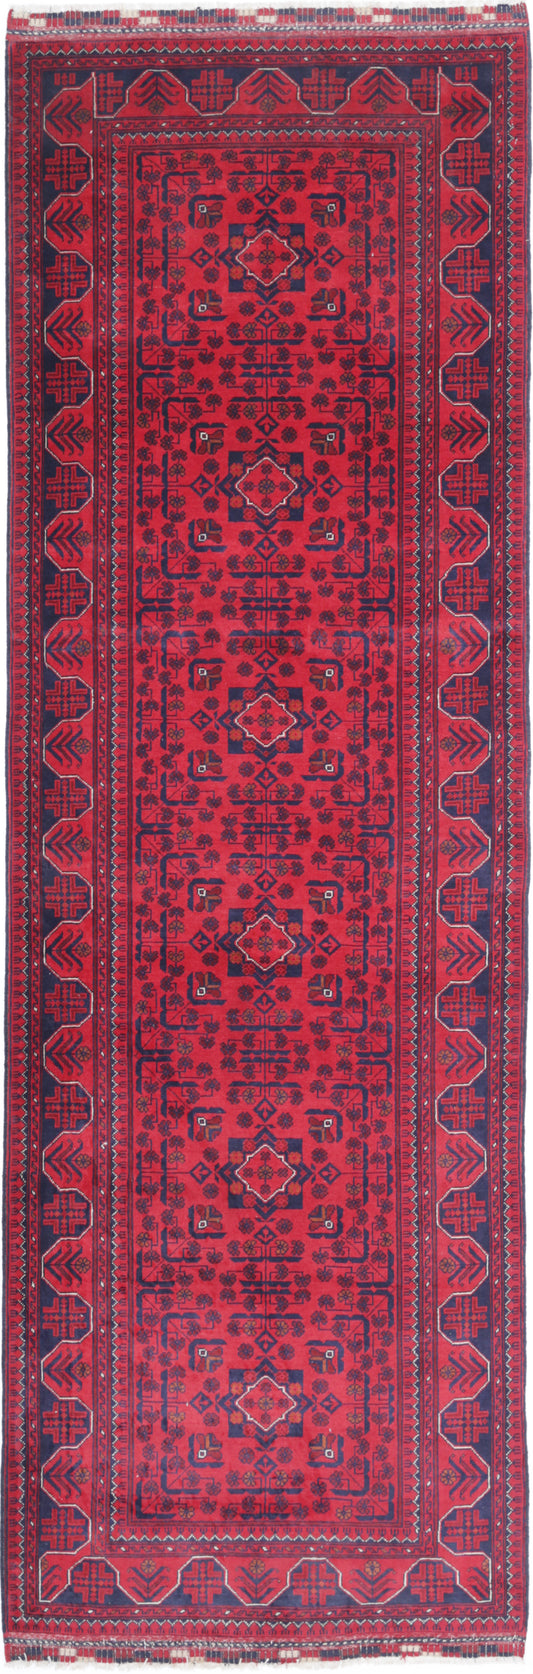 Tribal Hand Knotted Afghan Khamyab Wool Rug of Size 3'0'' X 9'10'' in Red and Red Colors - Made in Afghanistan